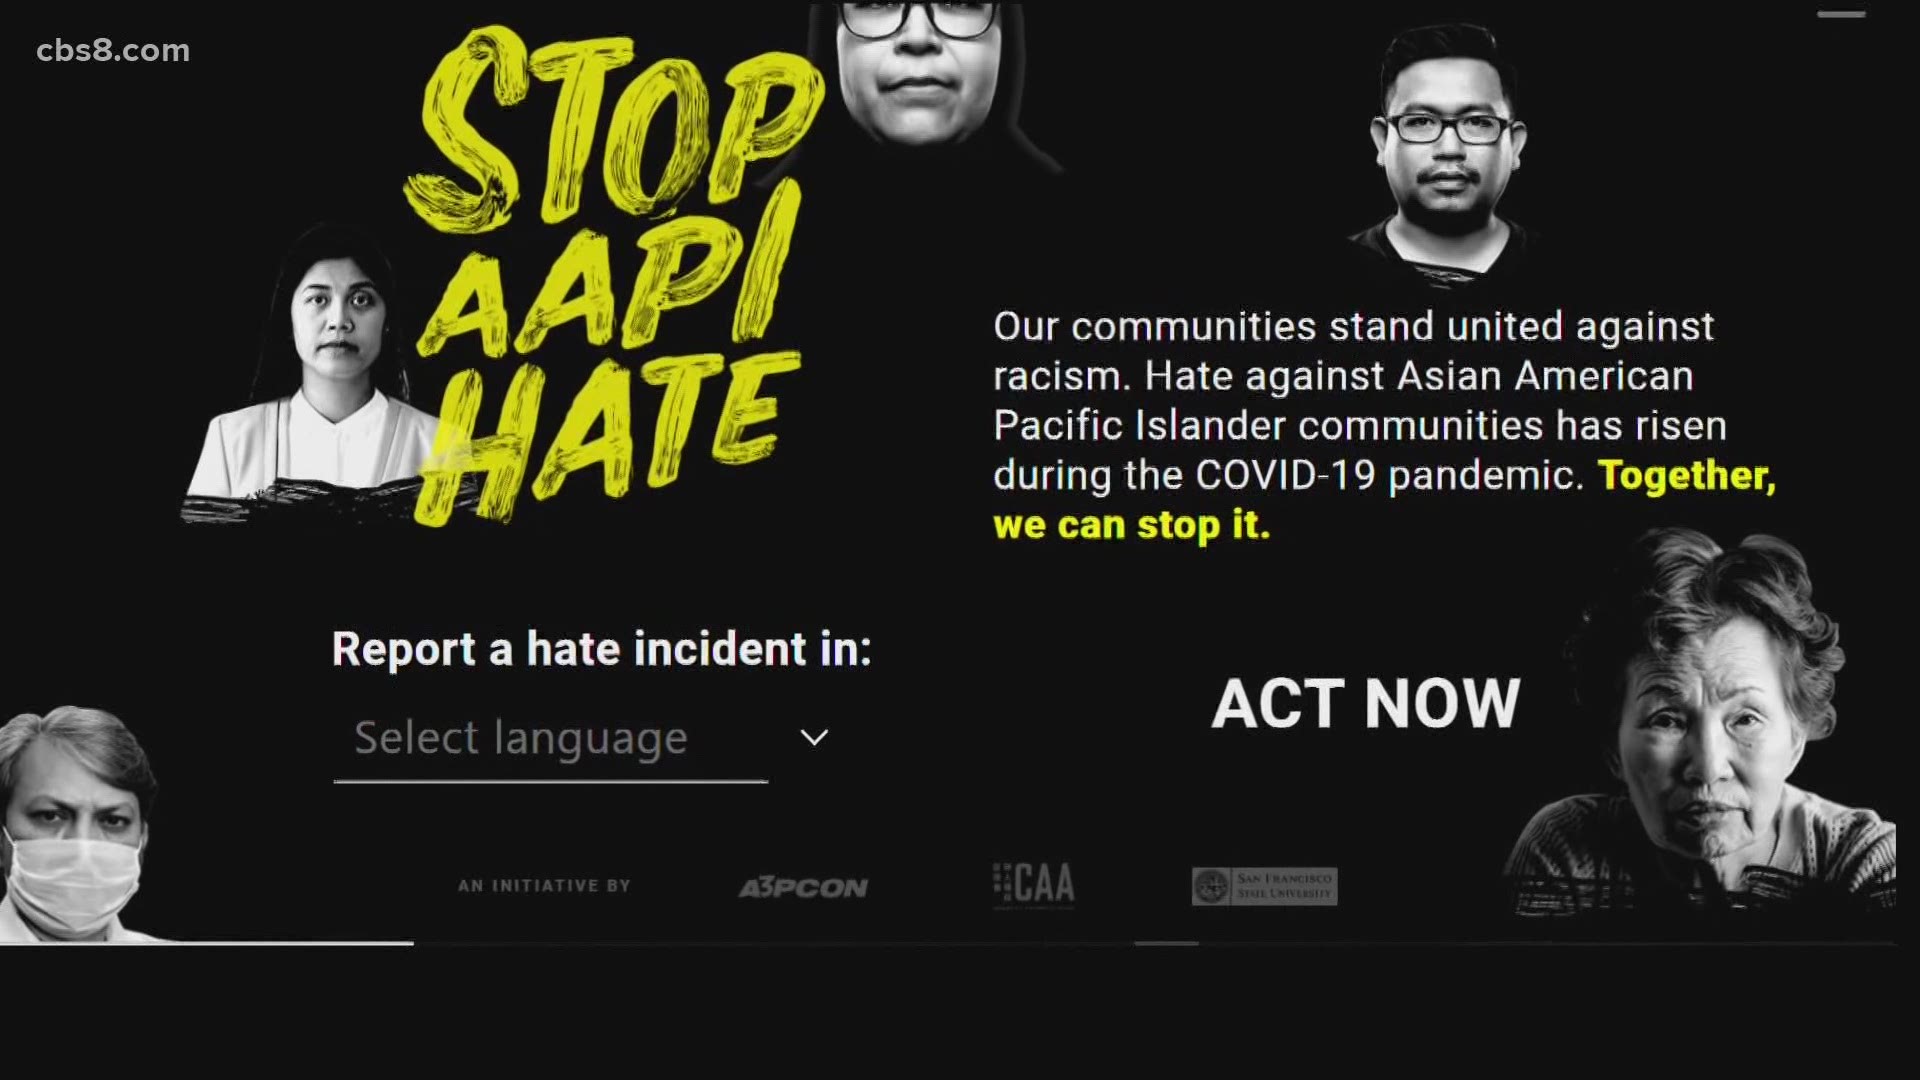 Asian Americans across the country are calling for action in the wake of attacks on their community.